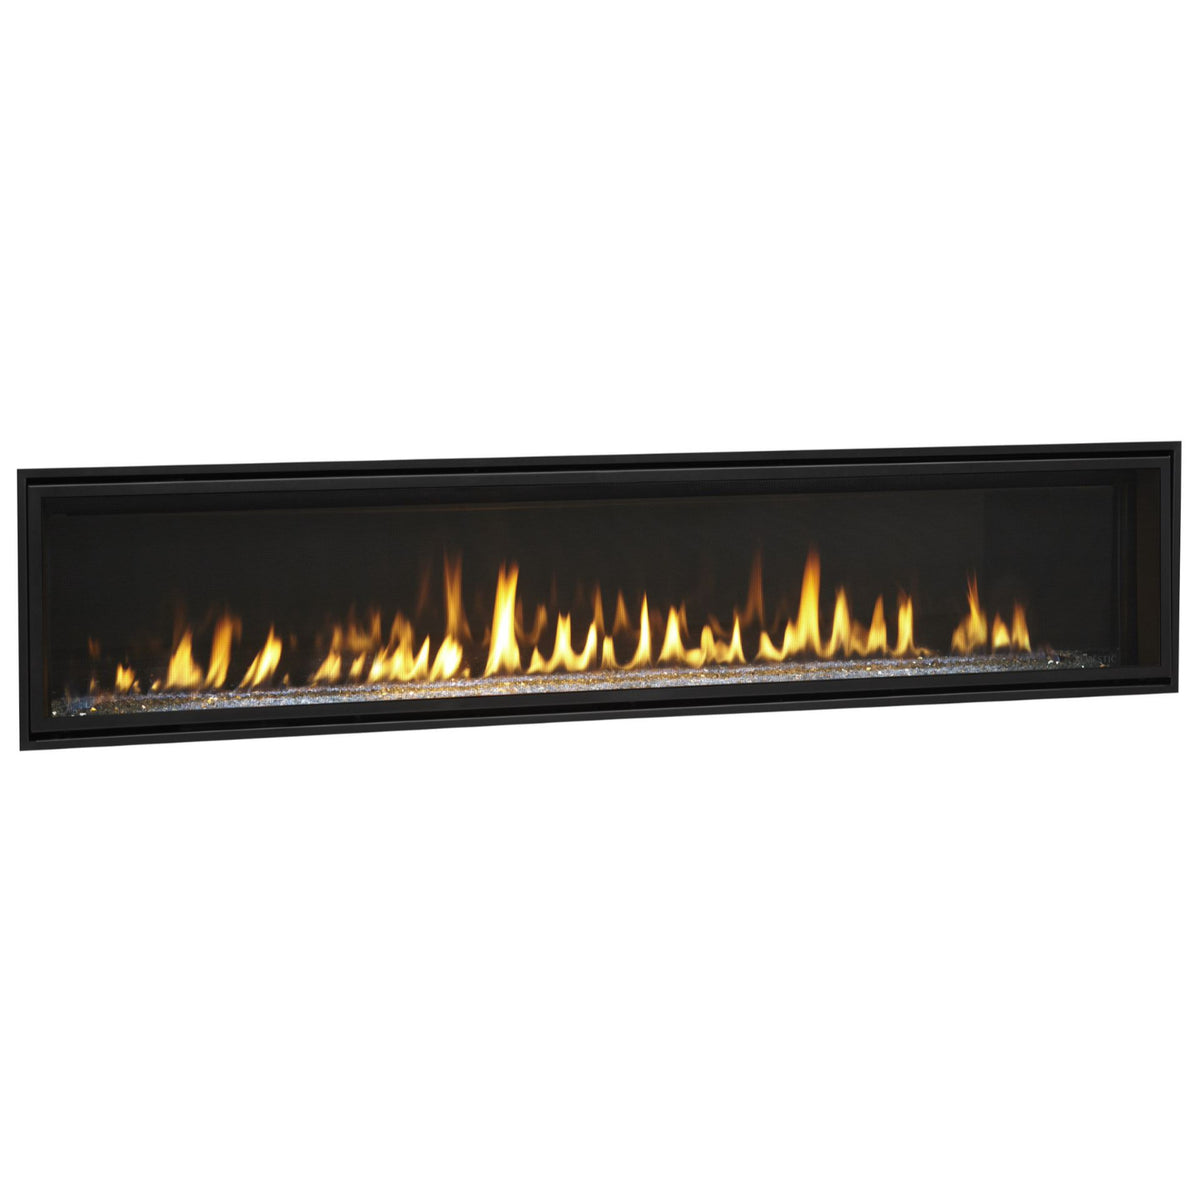 Majestic Echelon II Series Single-Sided Direct Vent Linear Gas Fireplace with IntelliFire Touch Ignition System